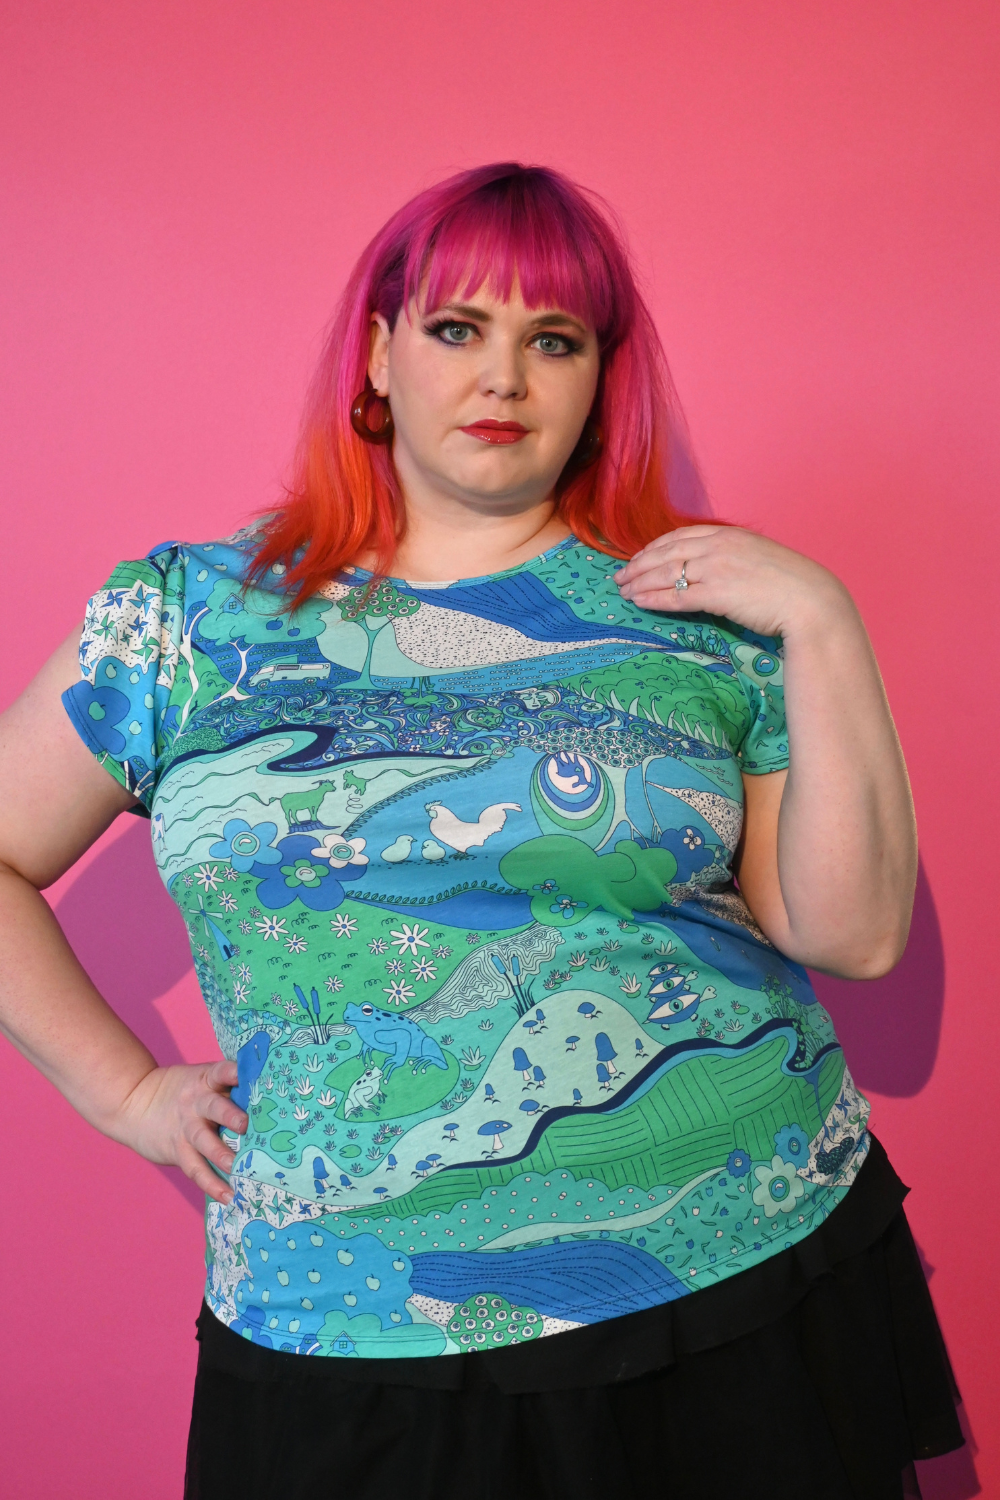 Pink haired model wearing shirt with landscape graphic in green and blue